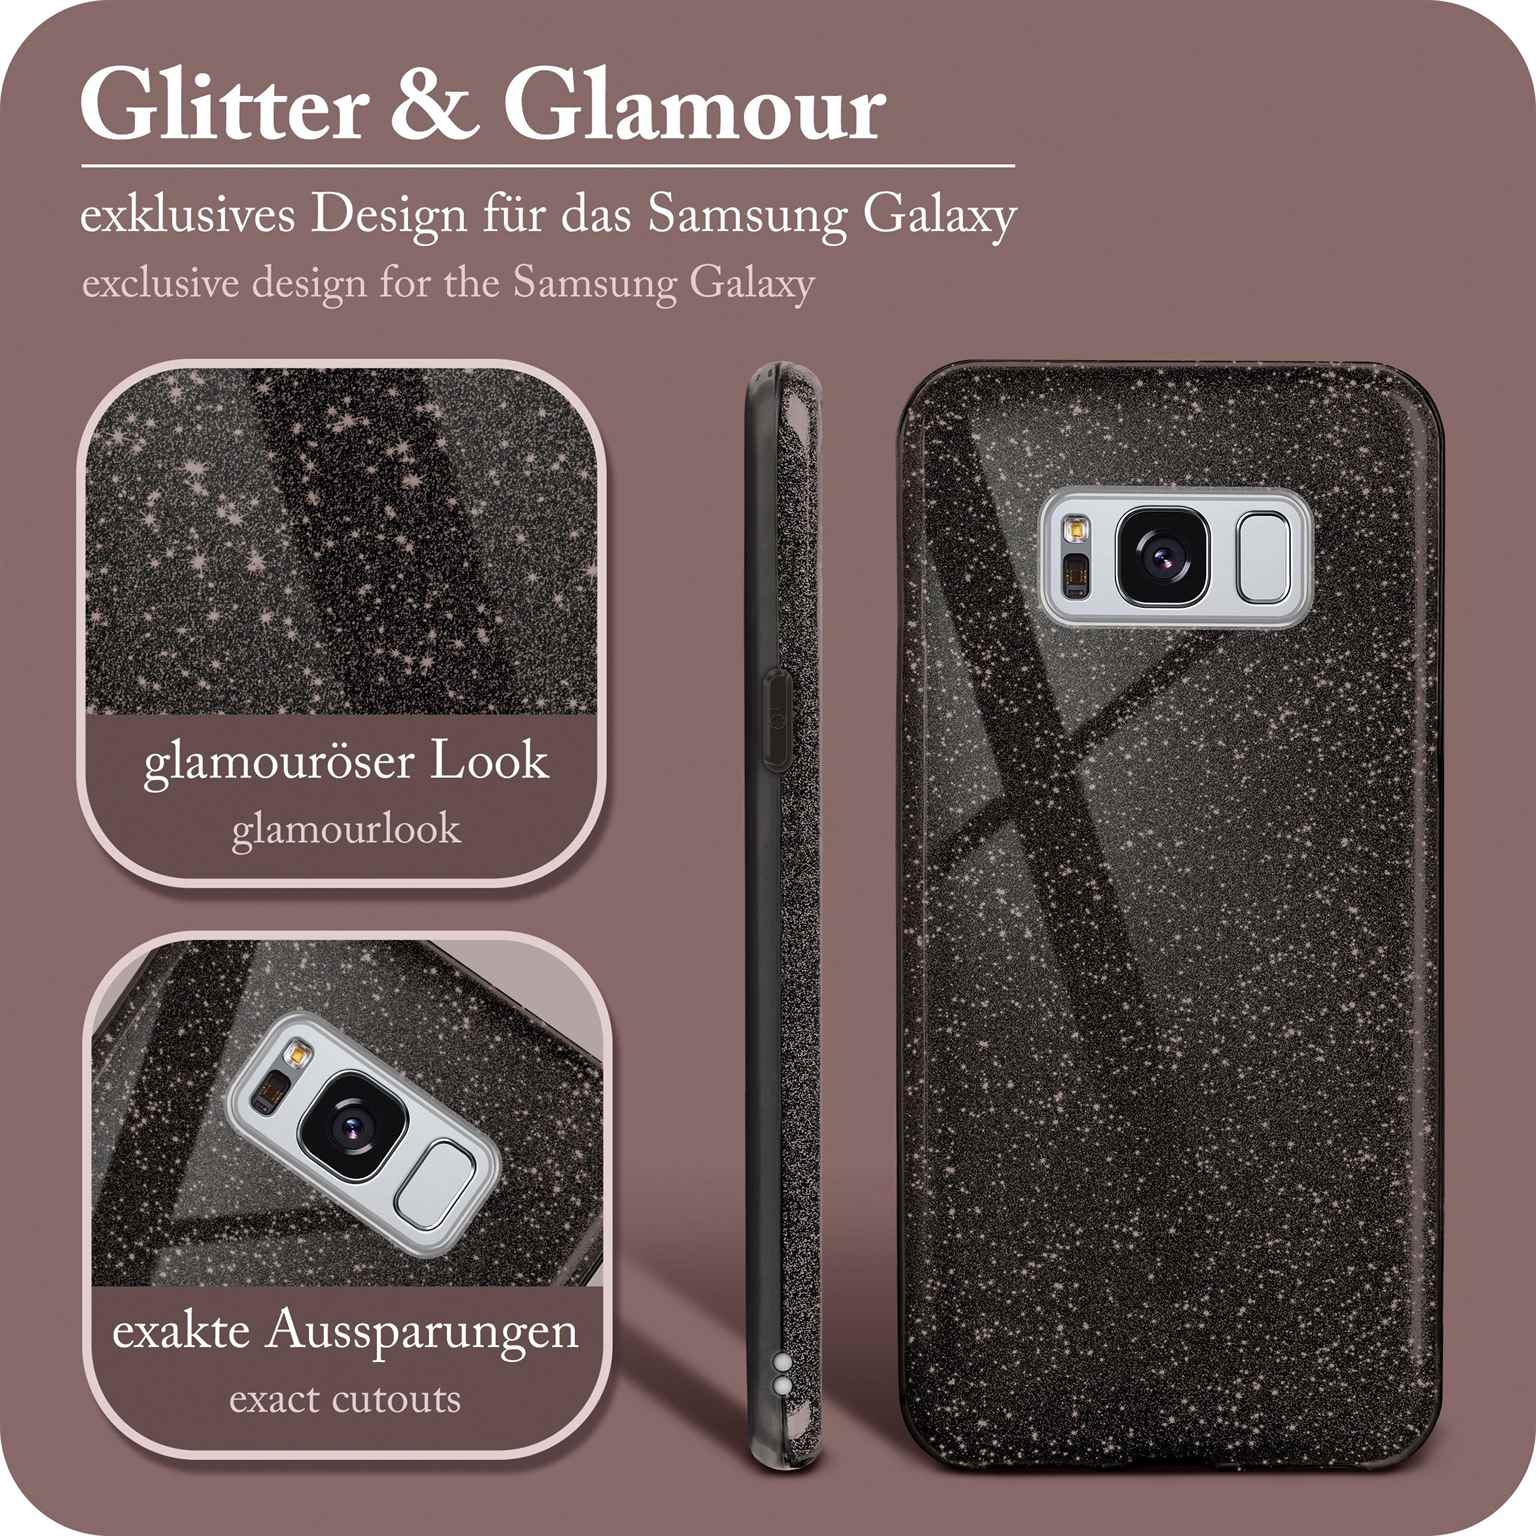 Galaxy Black S8 Glamour Backcover, ONEFLOW Plus, Case, Samsung, Glitter -